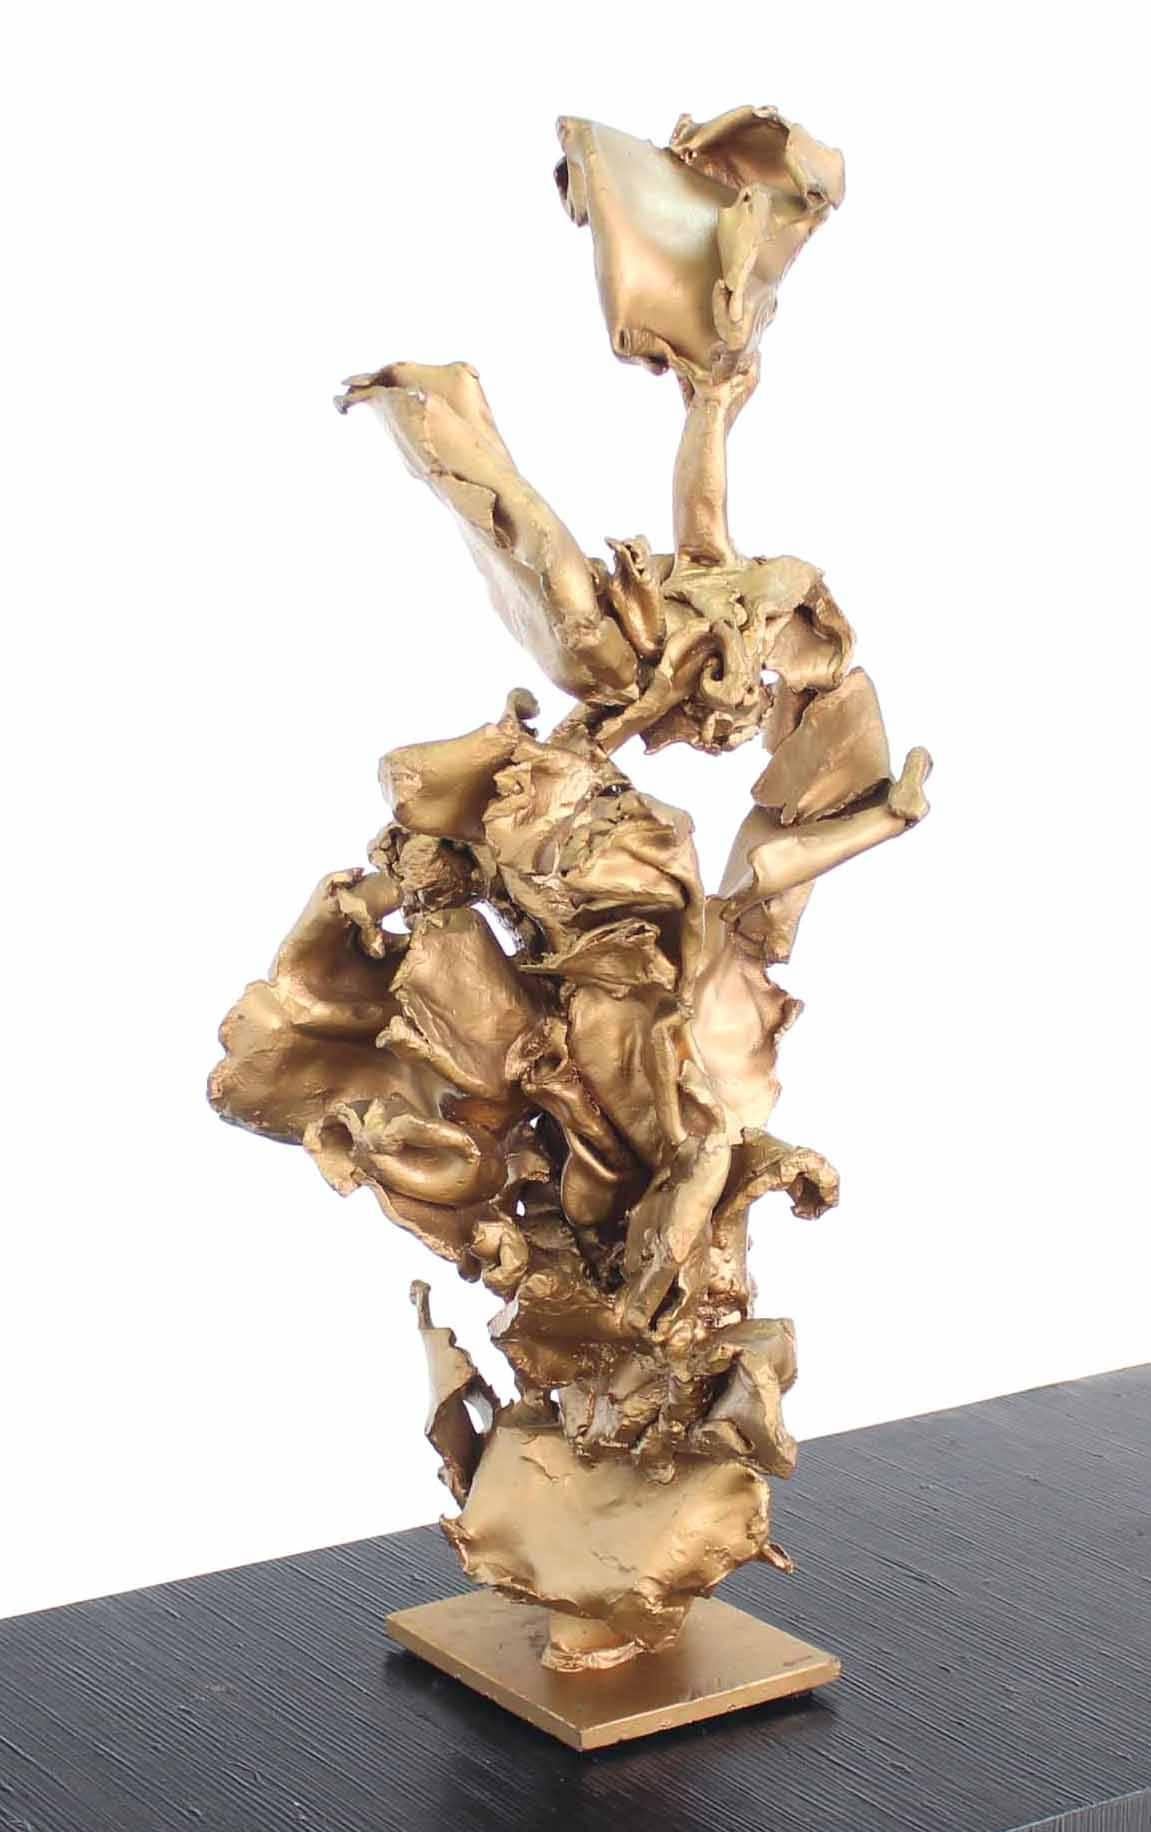 Twisted Metal Flakes Abstract Sculpture In Excellent Condition For Sale In Rockaway, NJ